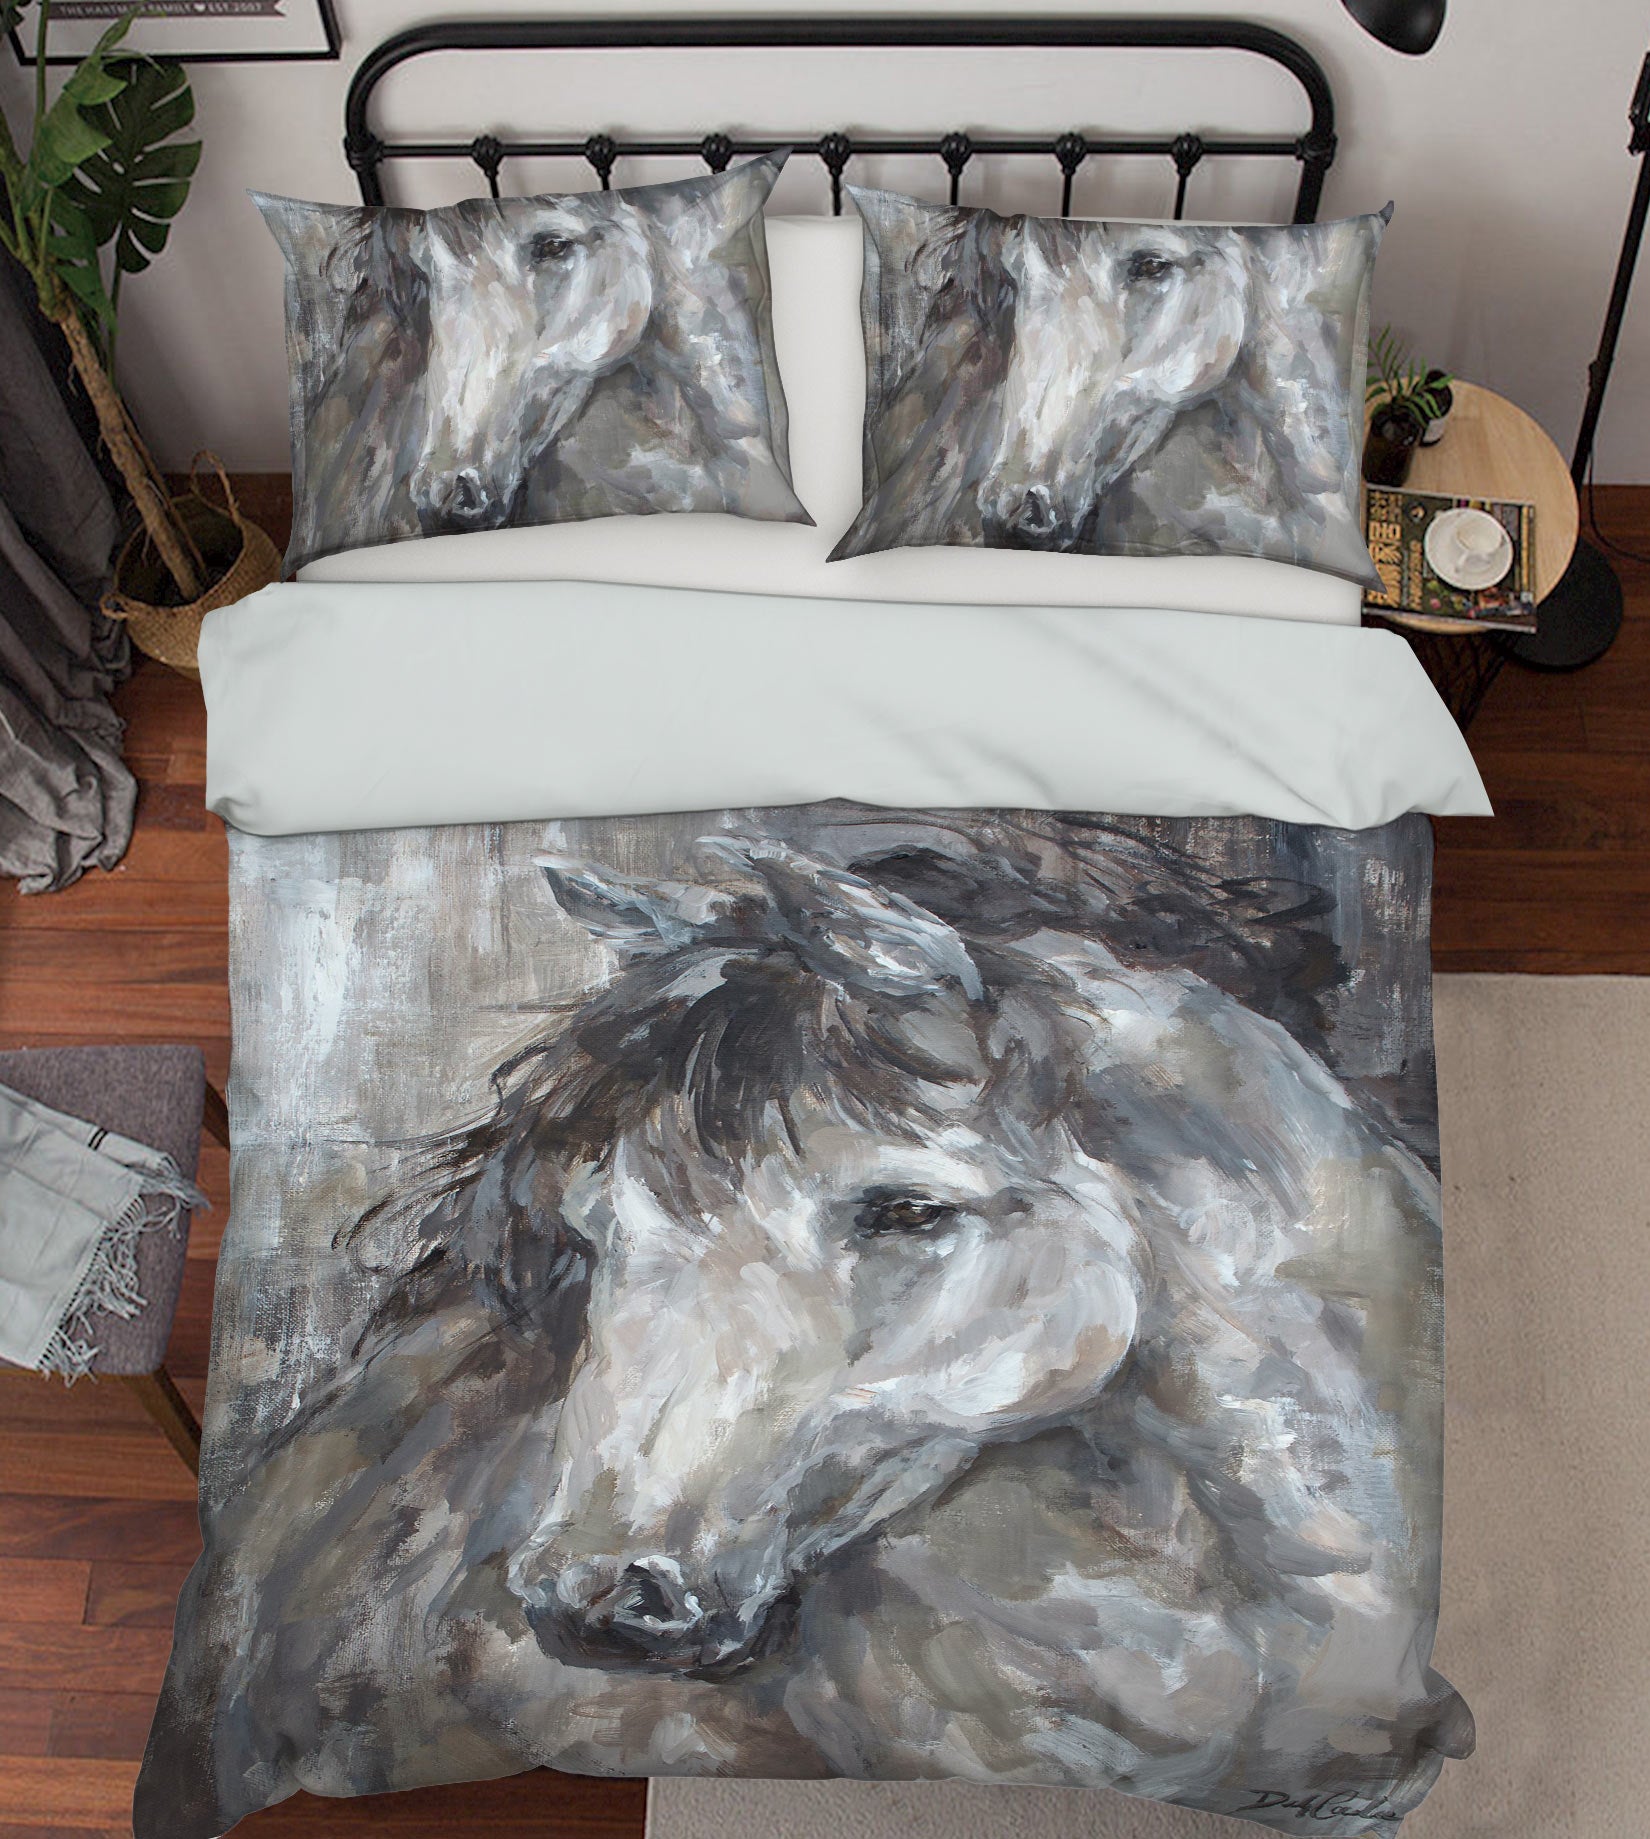 3D Horse 2096 Debi Coules Bedding Bed Pillowcases Quilt